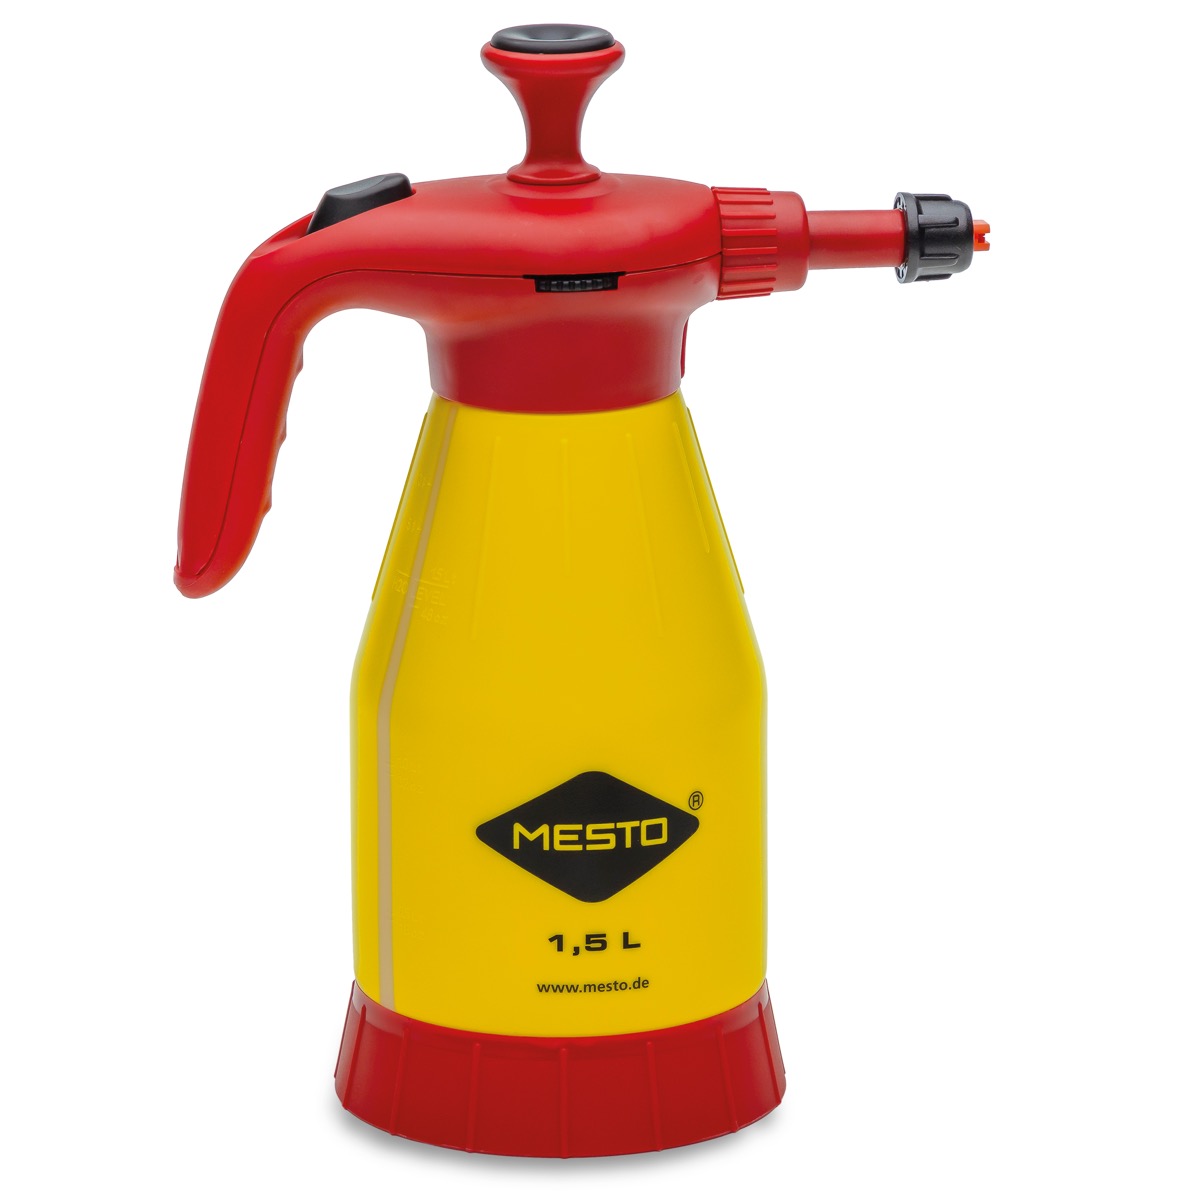 Mesto Industrial Flat Jet Plus Sprayer. The Mesto Industrial Flat Jet Hand Sprayer has a 1.5 litre capacity. The all-round device of the 1.5 litre pressure sprayer class offers users many advantages for staying liquid. Available from Speedcrete, United Ki